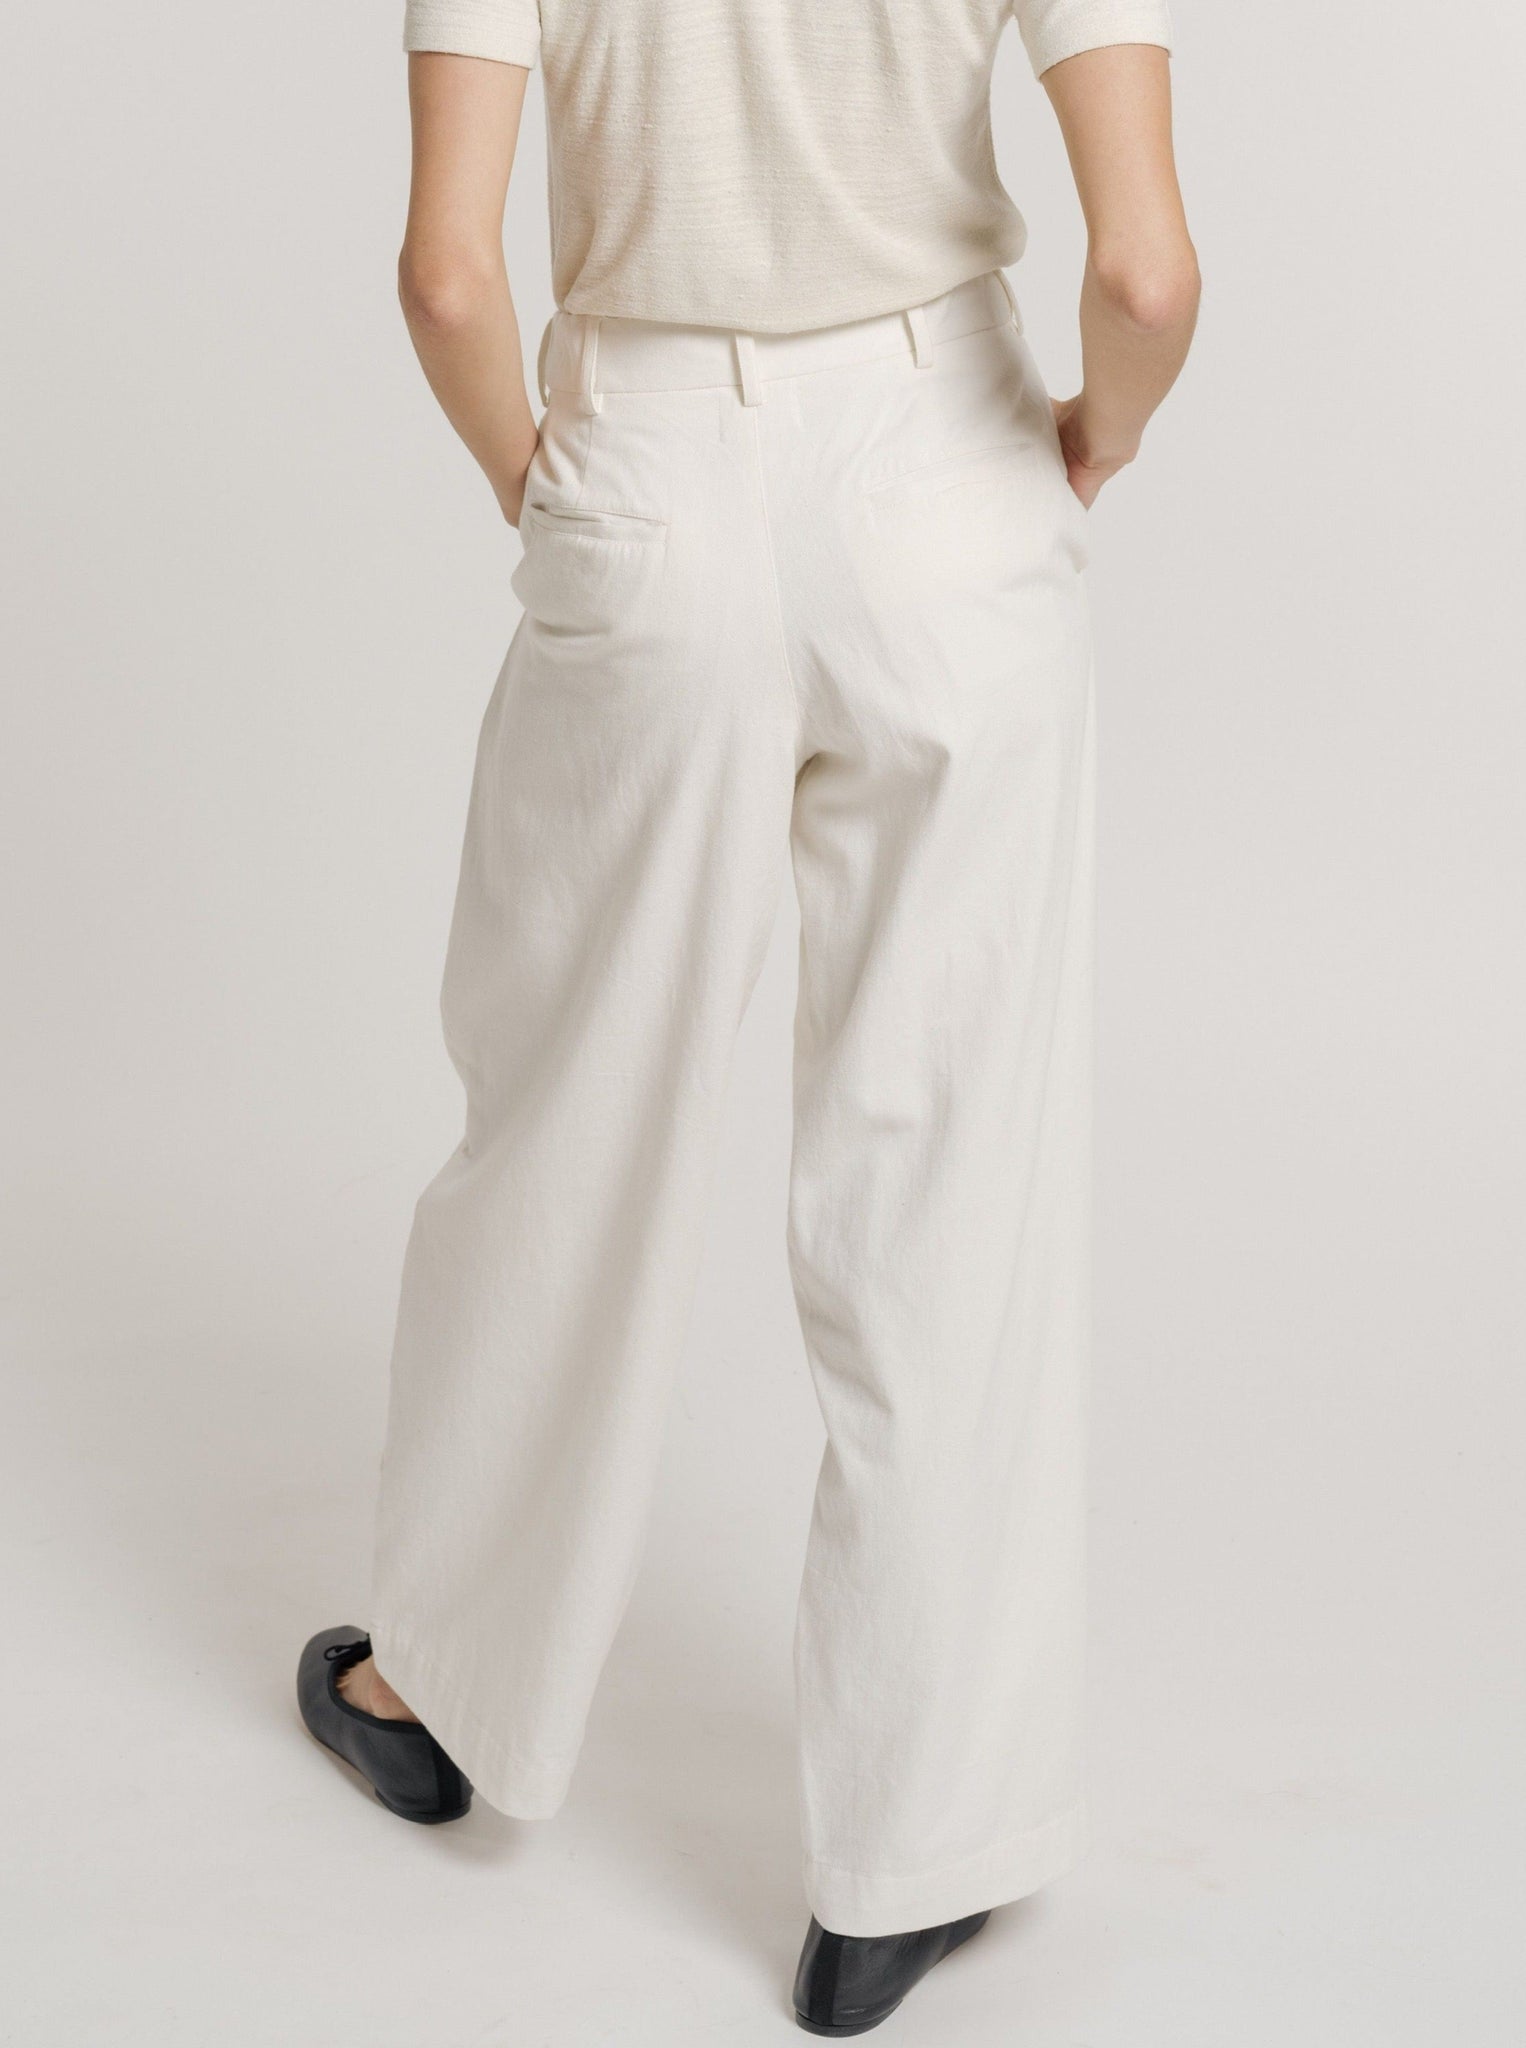 The back view of a woman wearing Alfred Trouser - Ivory with an elasticized waist.